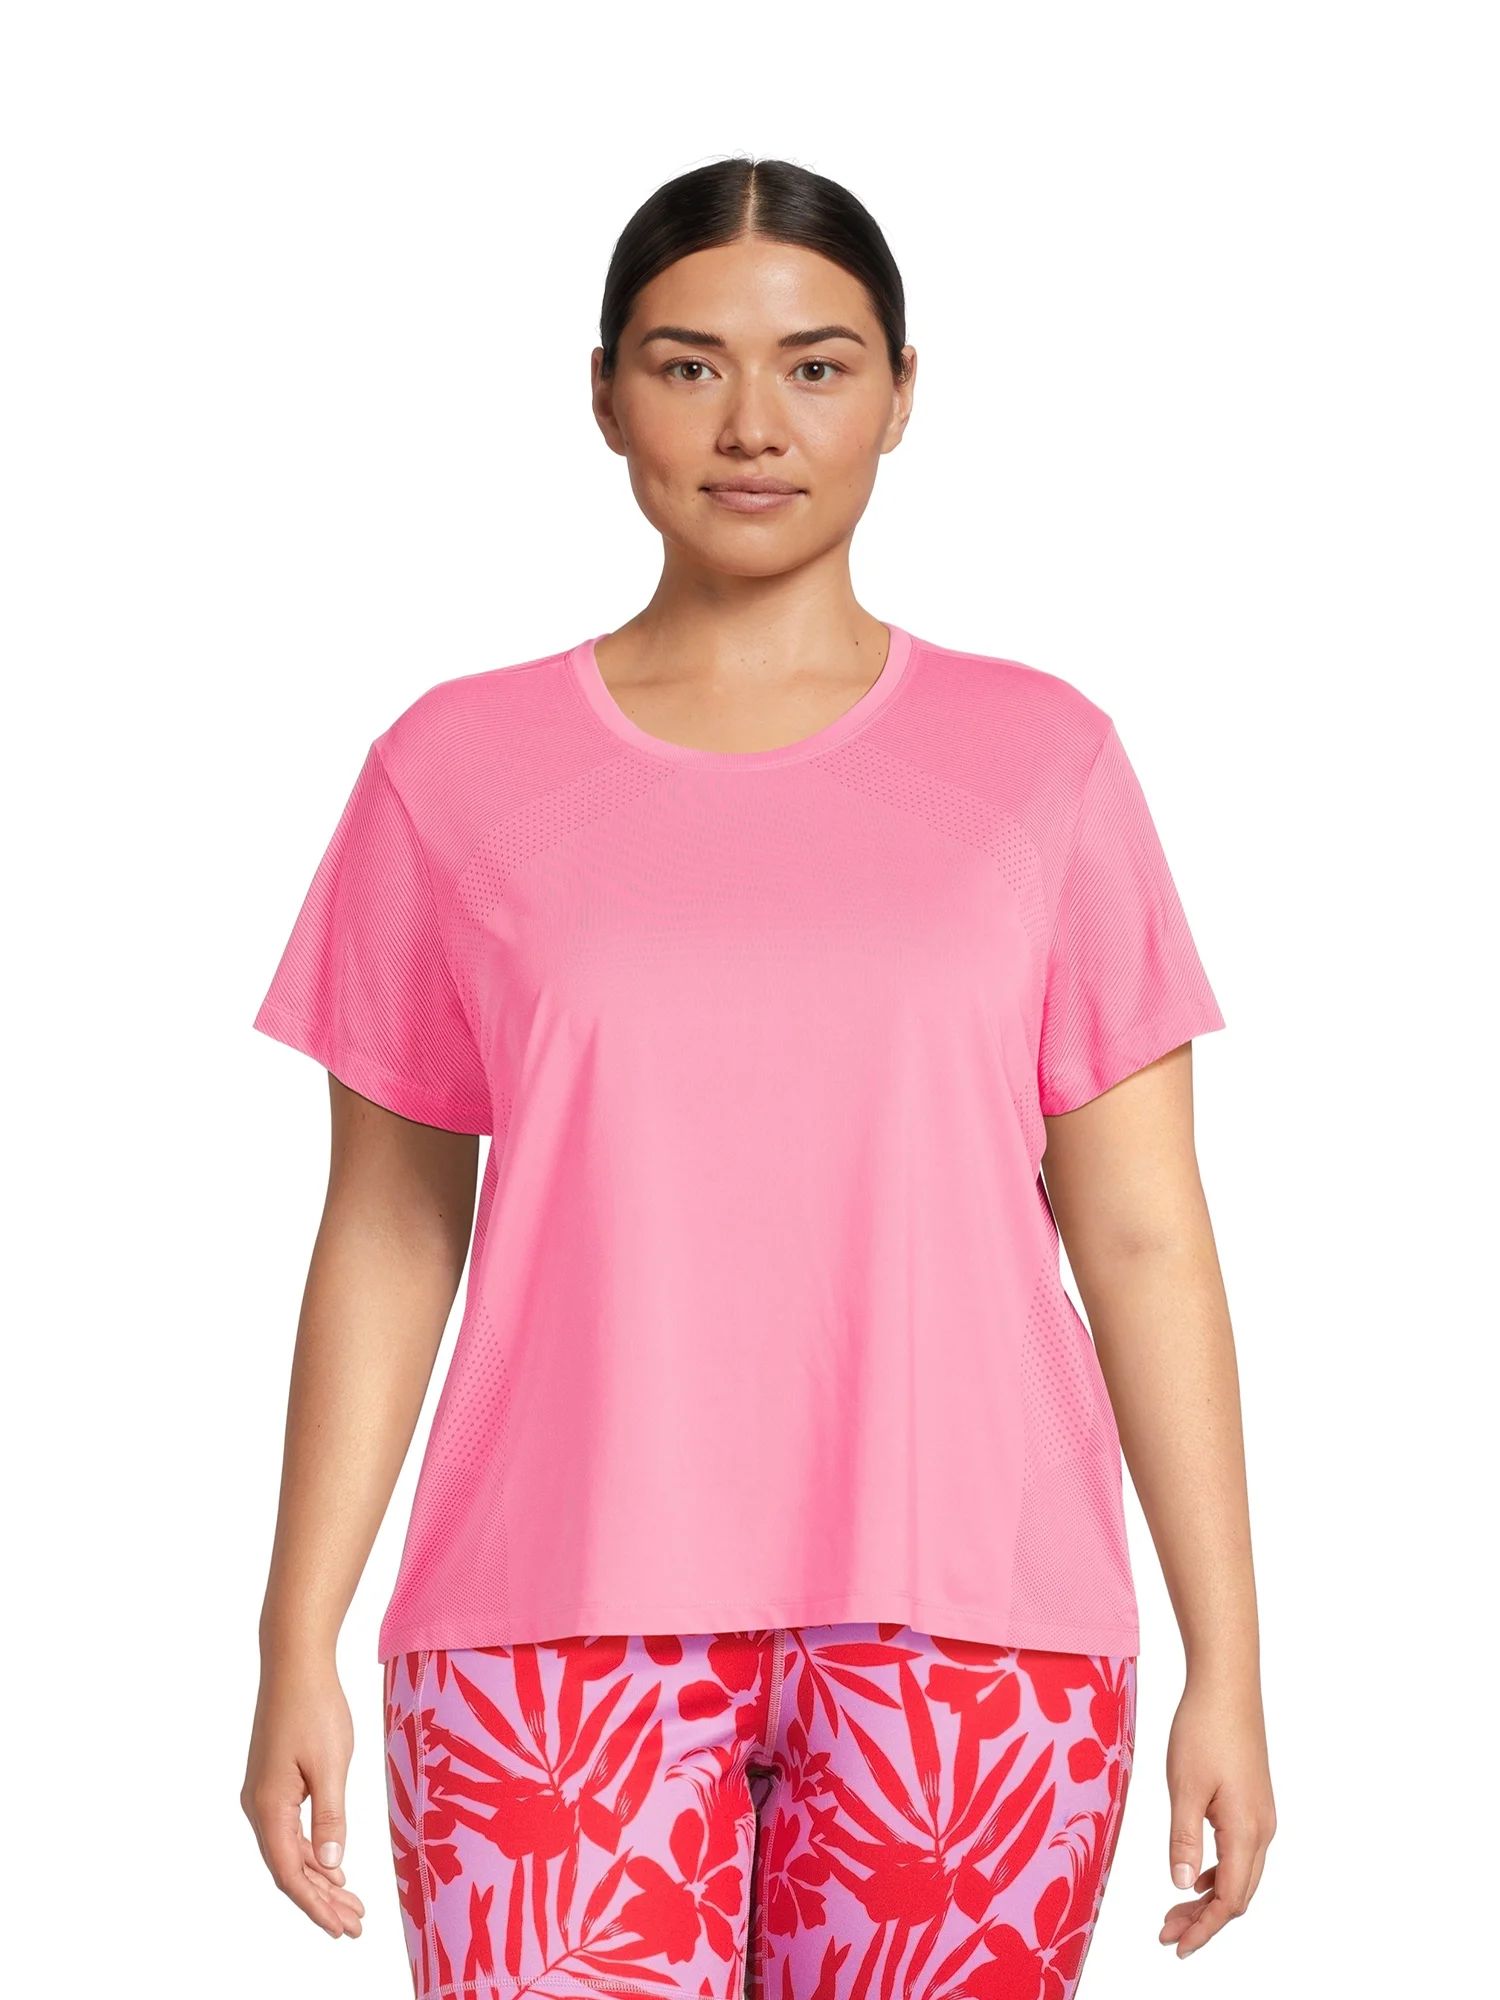 Avia Women’s and Women's Plus Perforated Performance T-Shirt with Short Sleeves, Sizes XS-4X | Walmart (US)